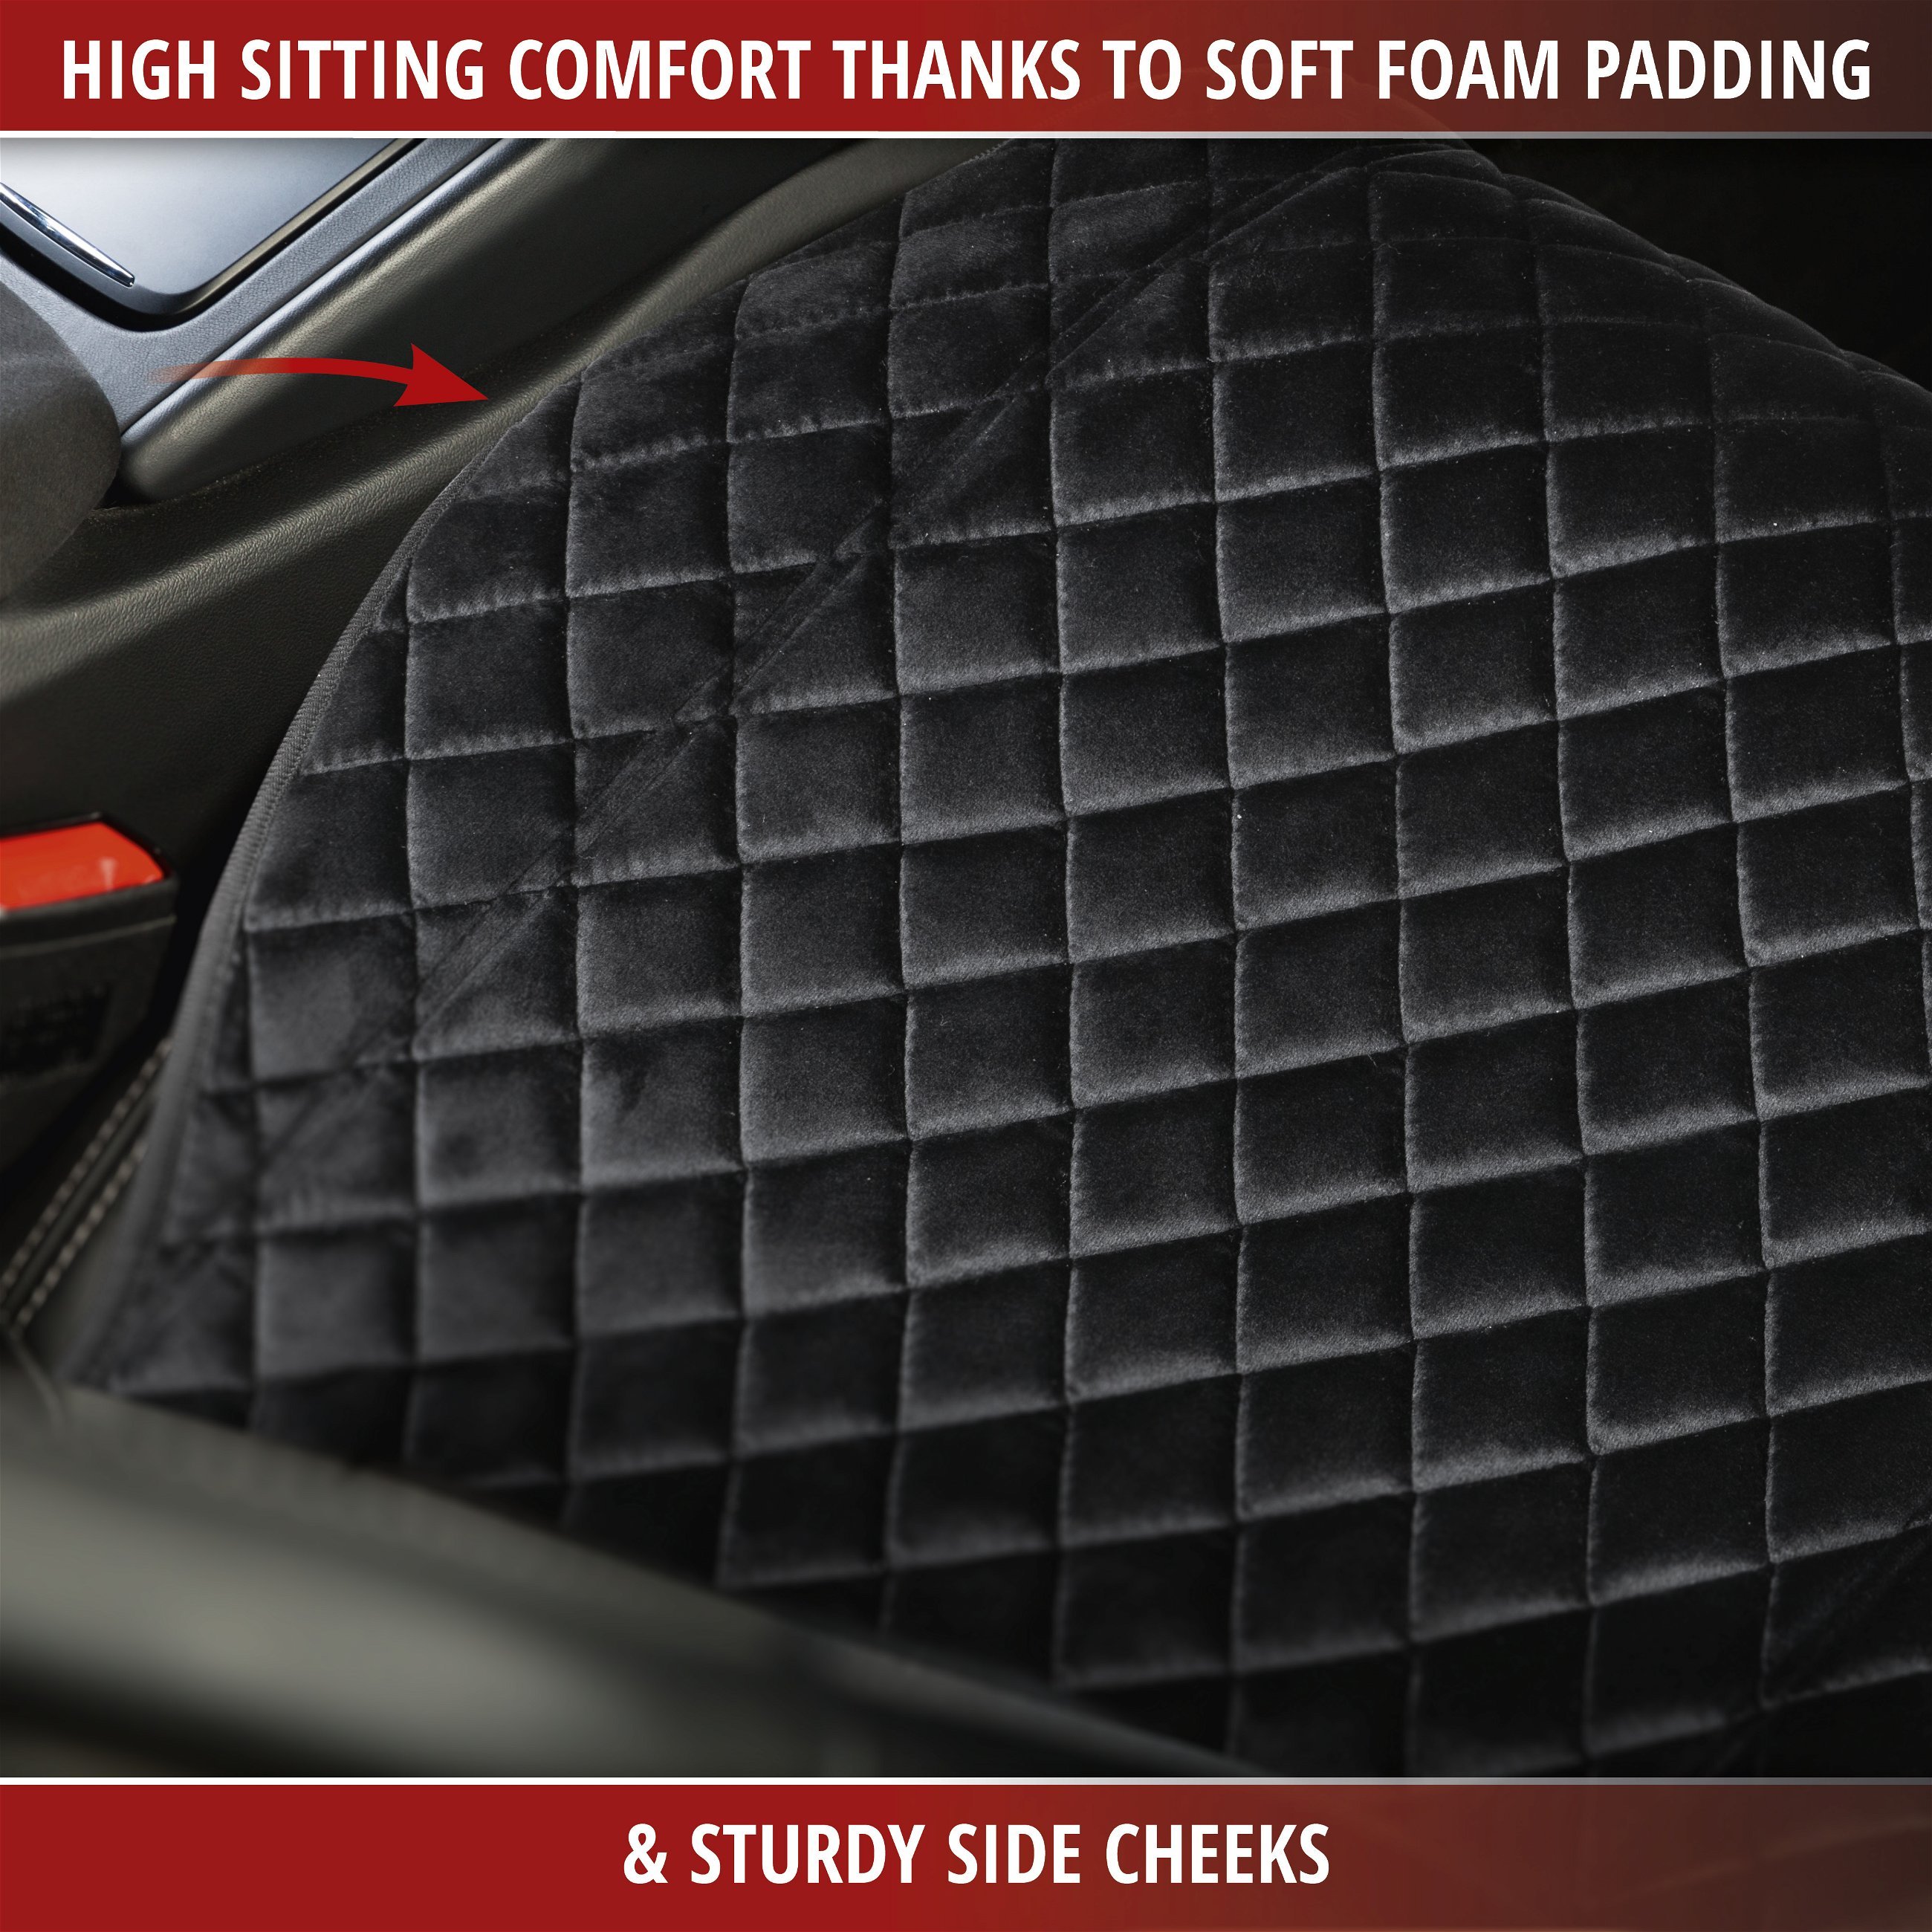 Seat cover Comfortline Luxor with anti-slip coating, 1 front seat with side bolster protection